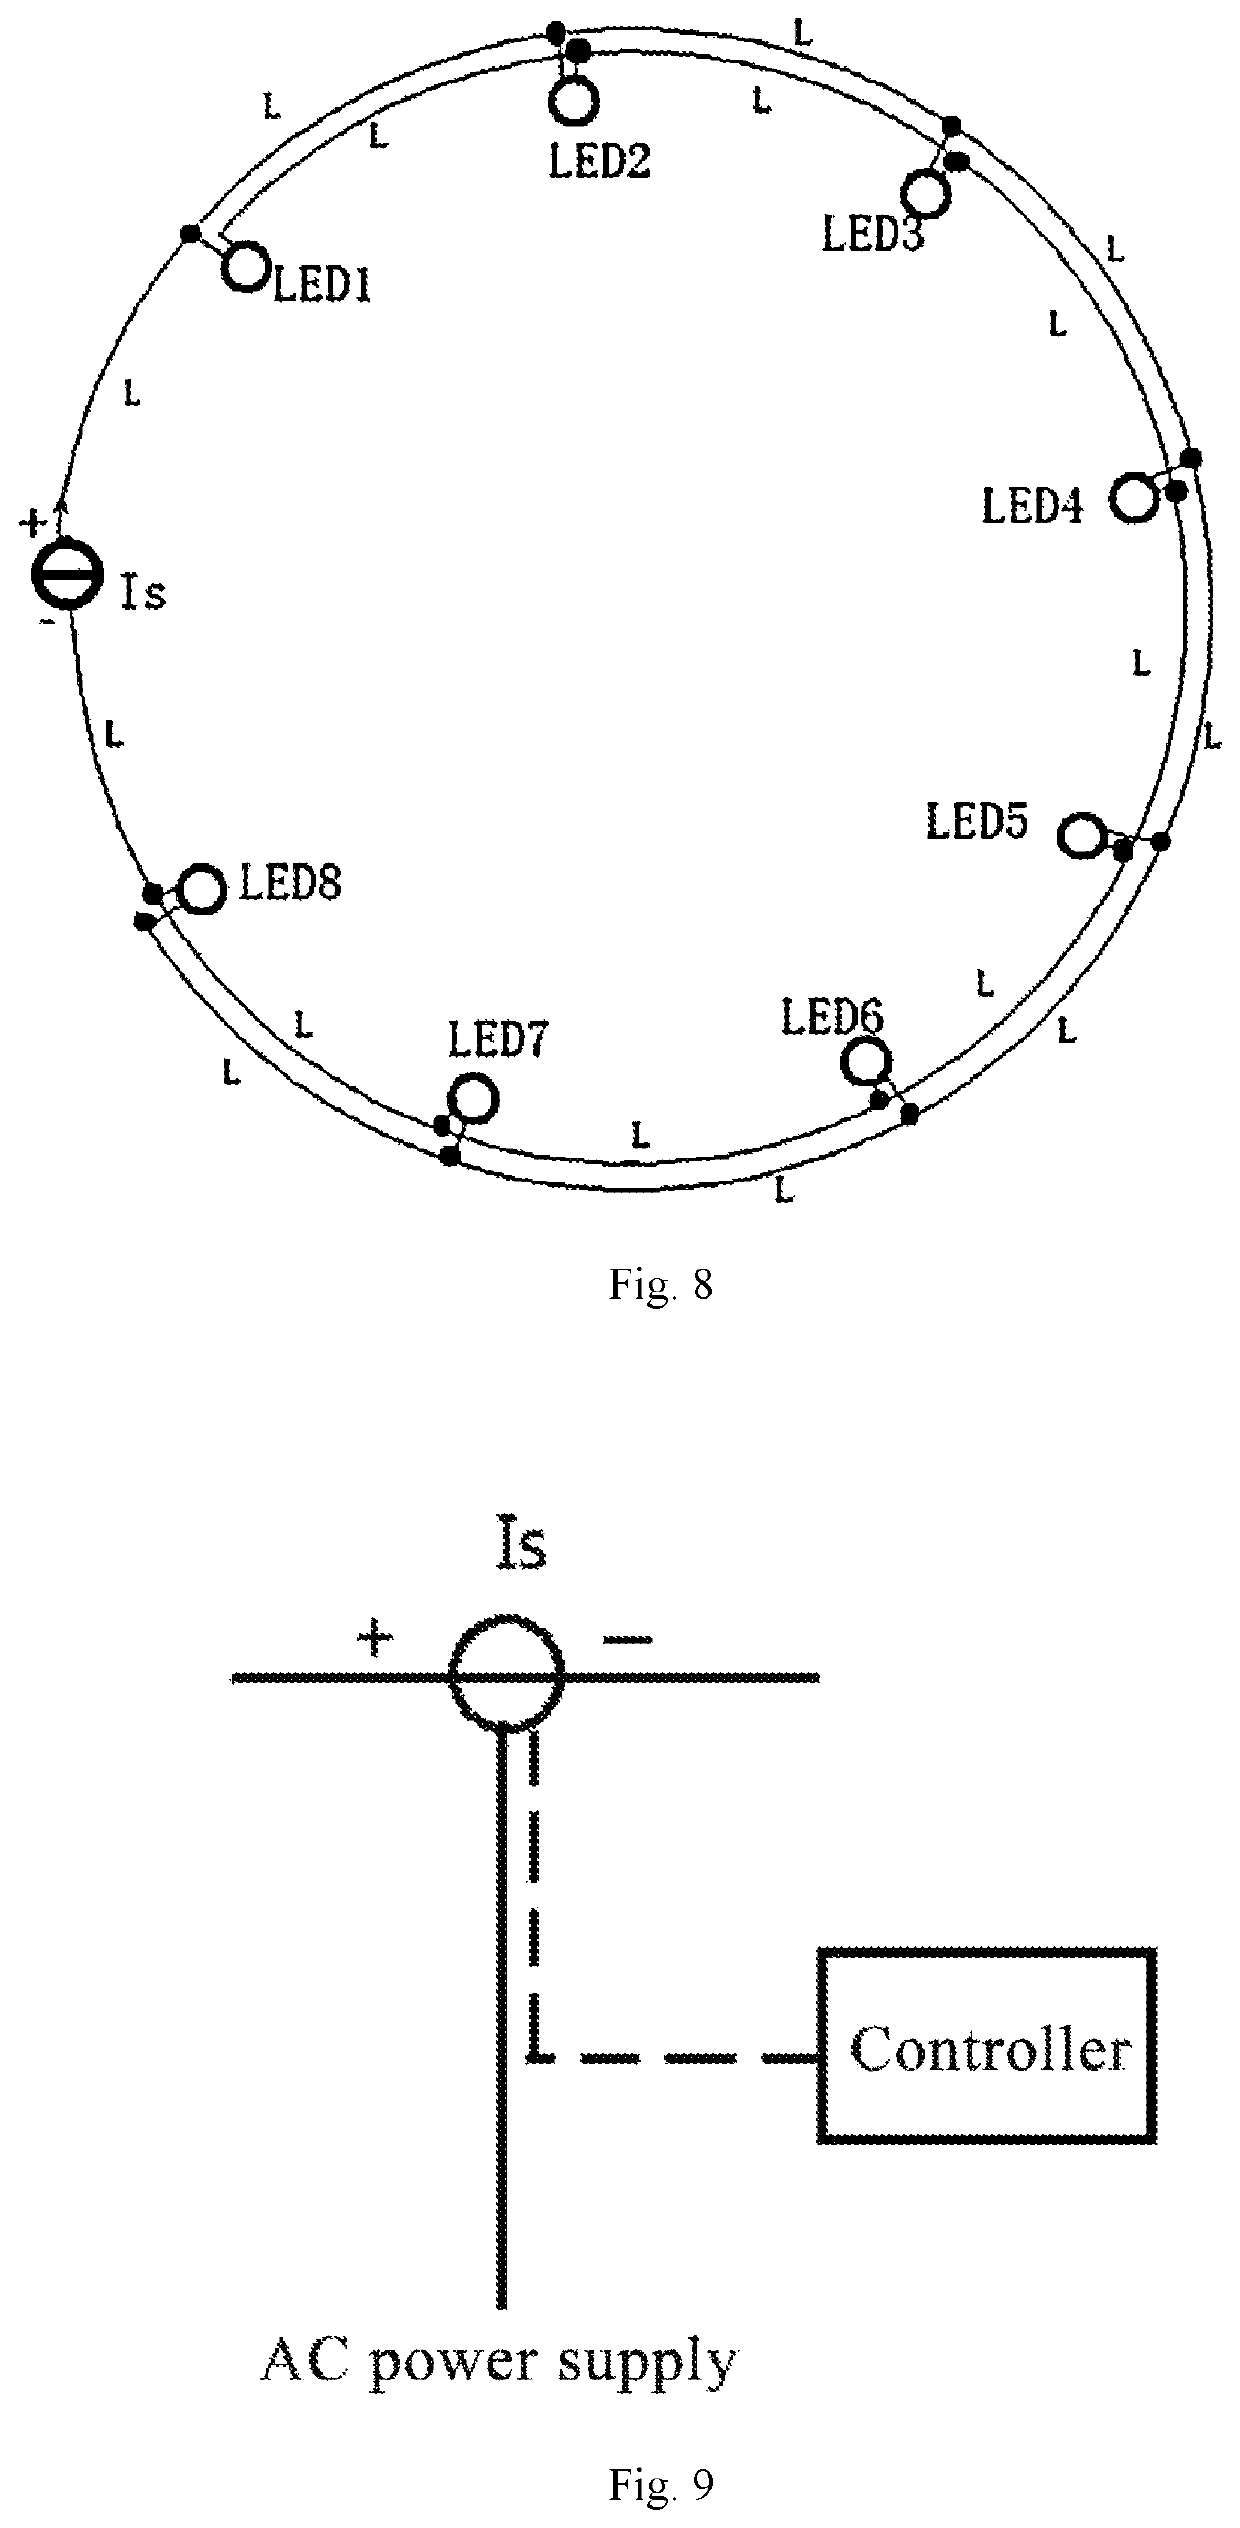 Constant-current and constant-voltage connection method for LED lamps and dimmable low-loss LED lamp